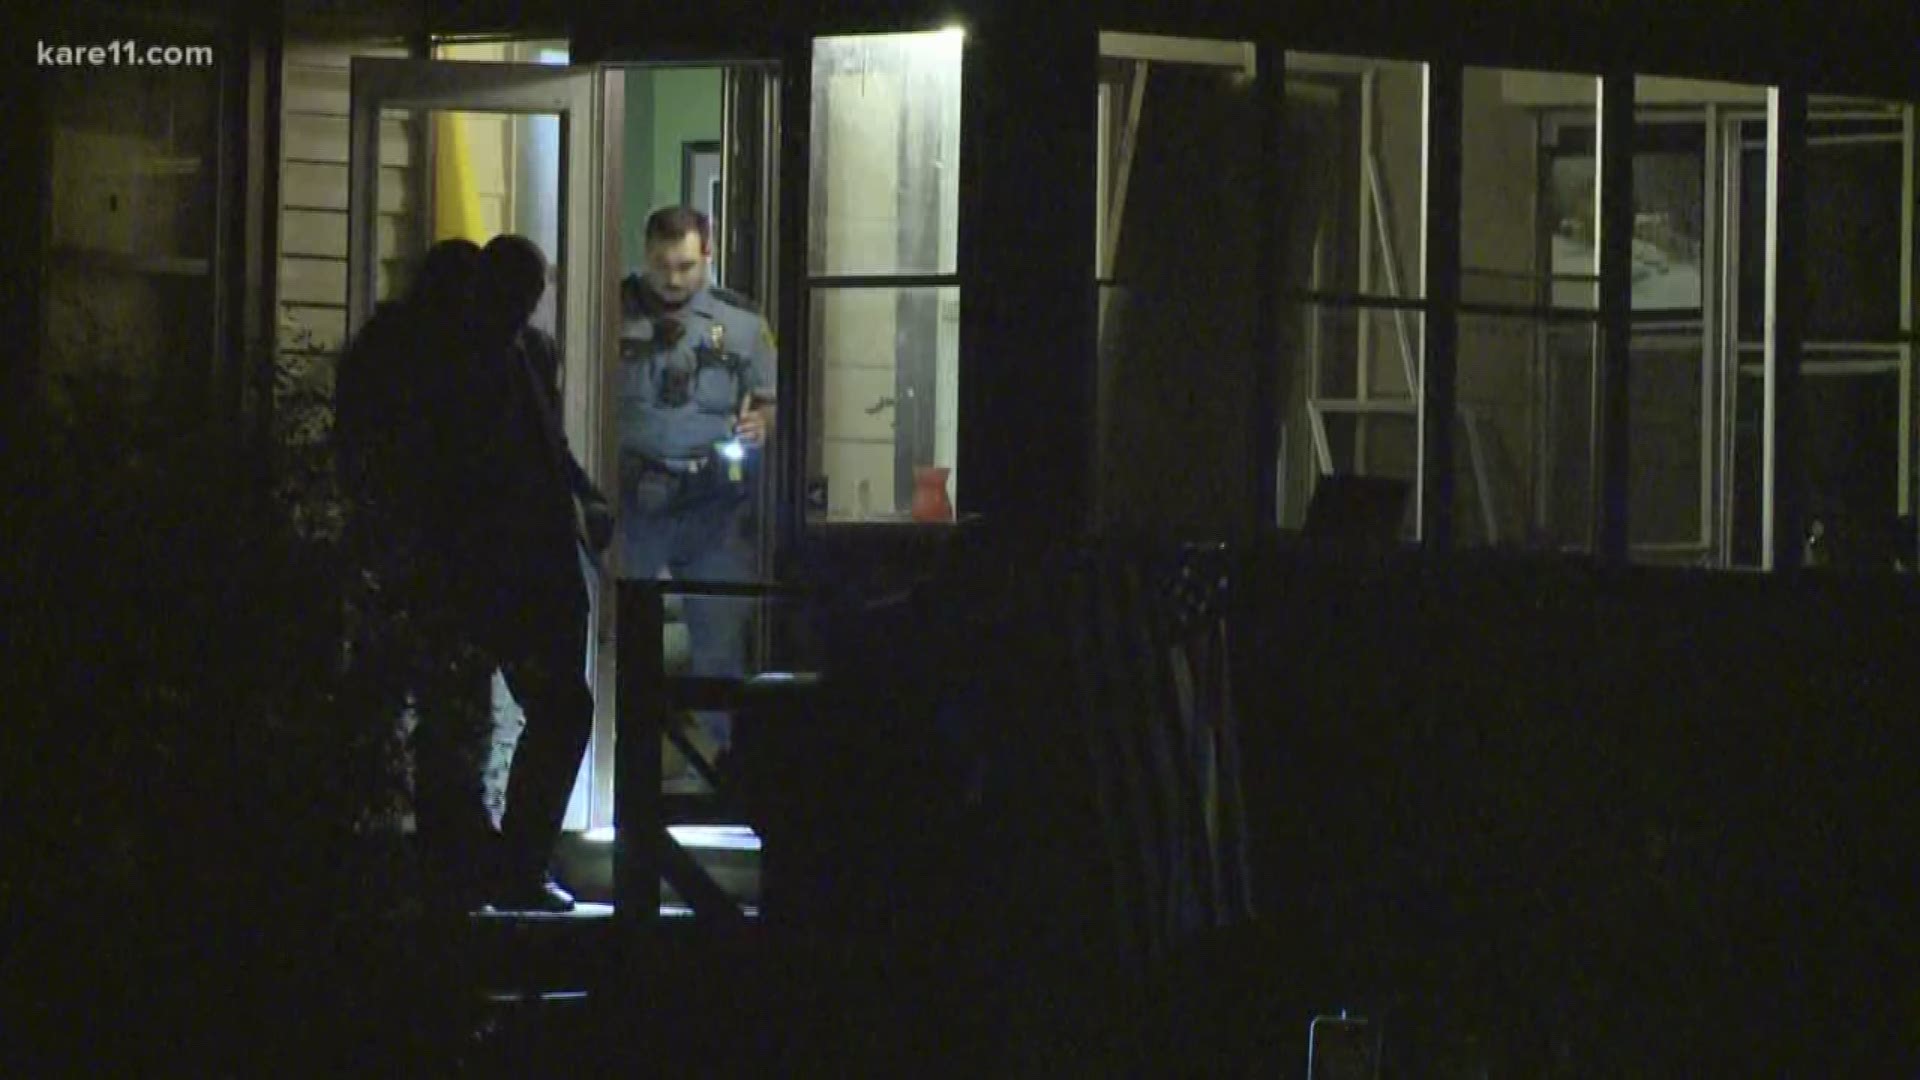 A man was shot in a home on Ivy Avenue around 8:30 Monday night and later died of his injuries.